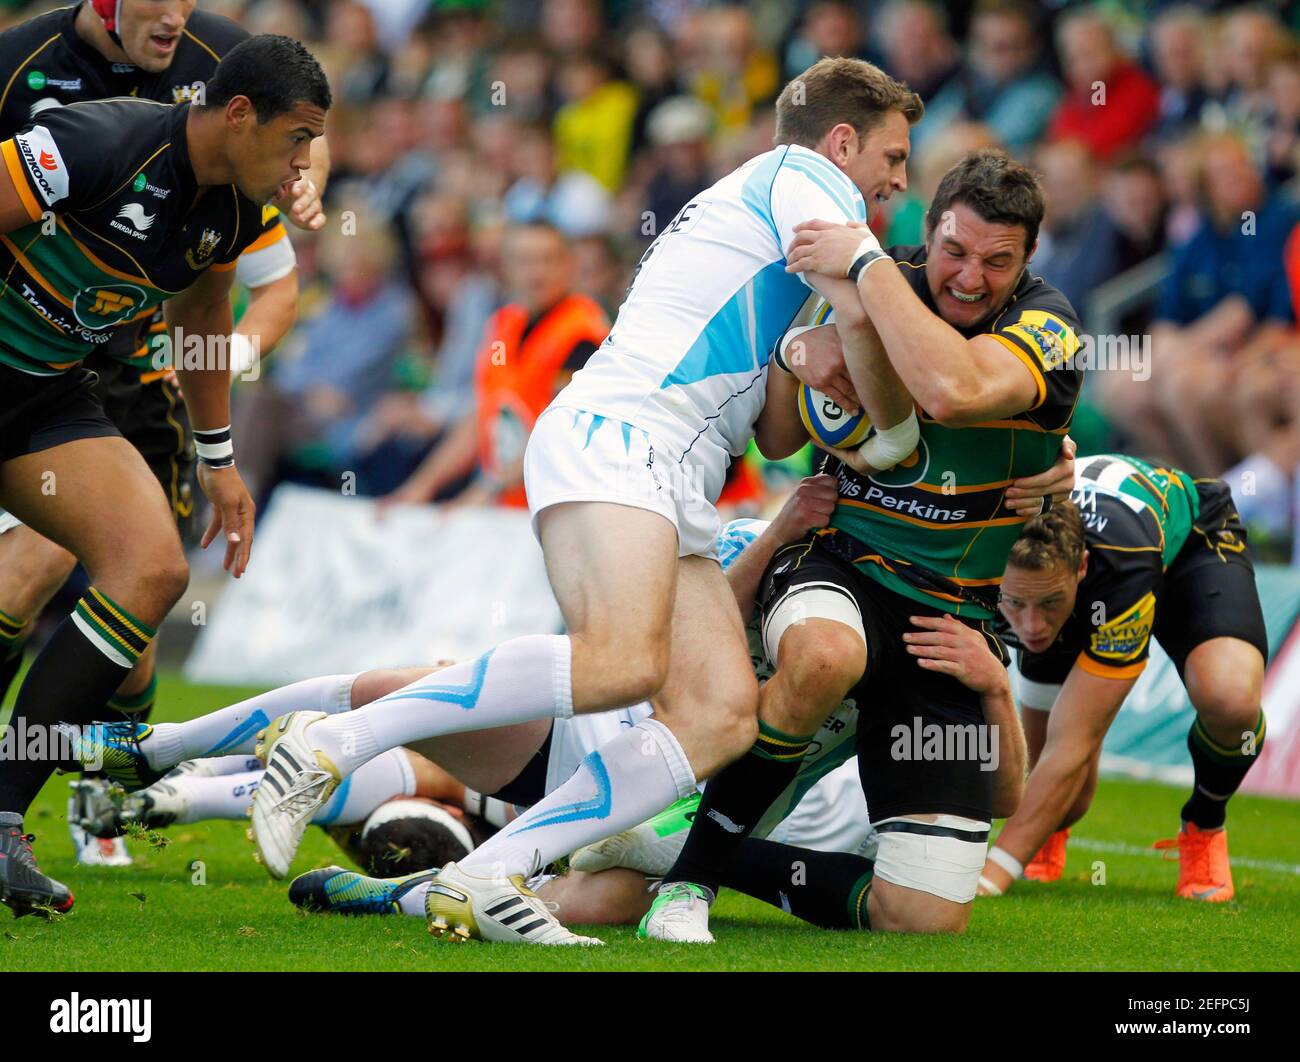 Rugby Union - Northampton Saints v Worcester Warriors - Aviva Premiership - Franklin's Gardens - 22/9/12  Northampton Saints' Phil Dowson (R) in action  Mandatory Credit: Action Images / James Benwell  Livepic Stock Photo